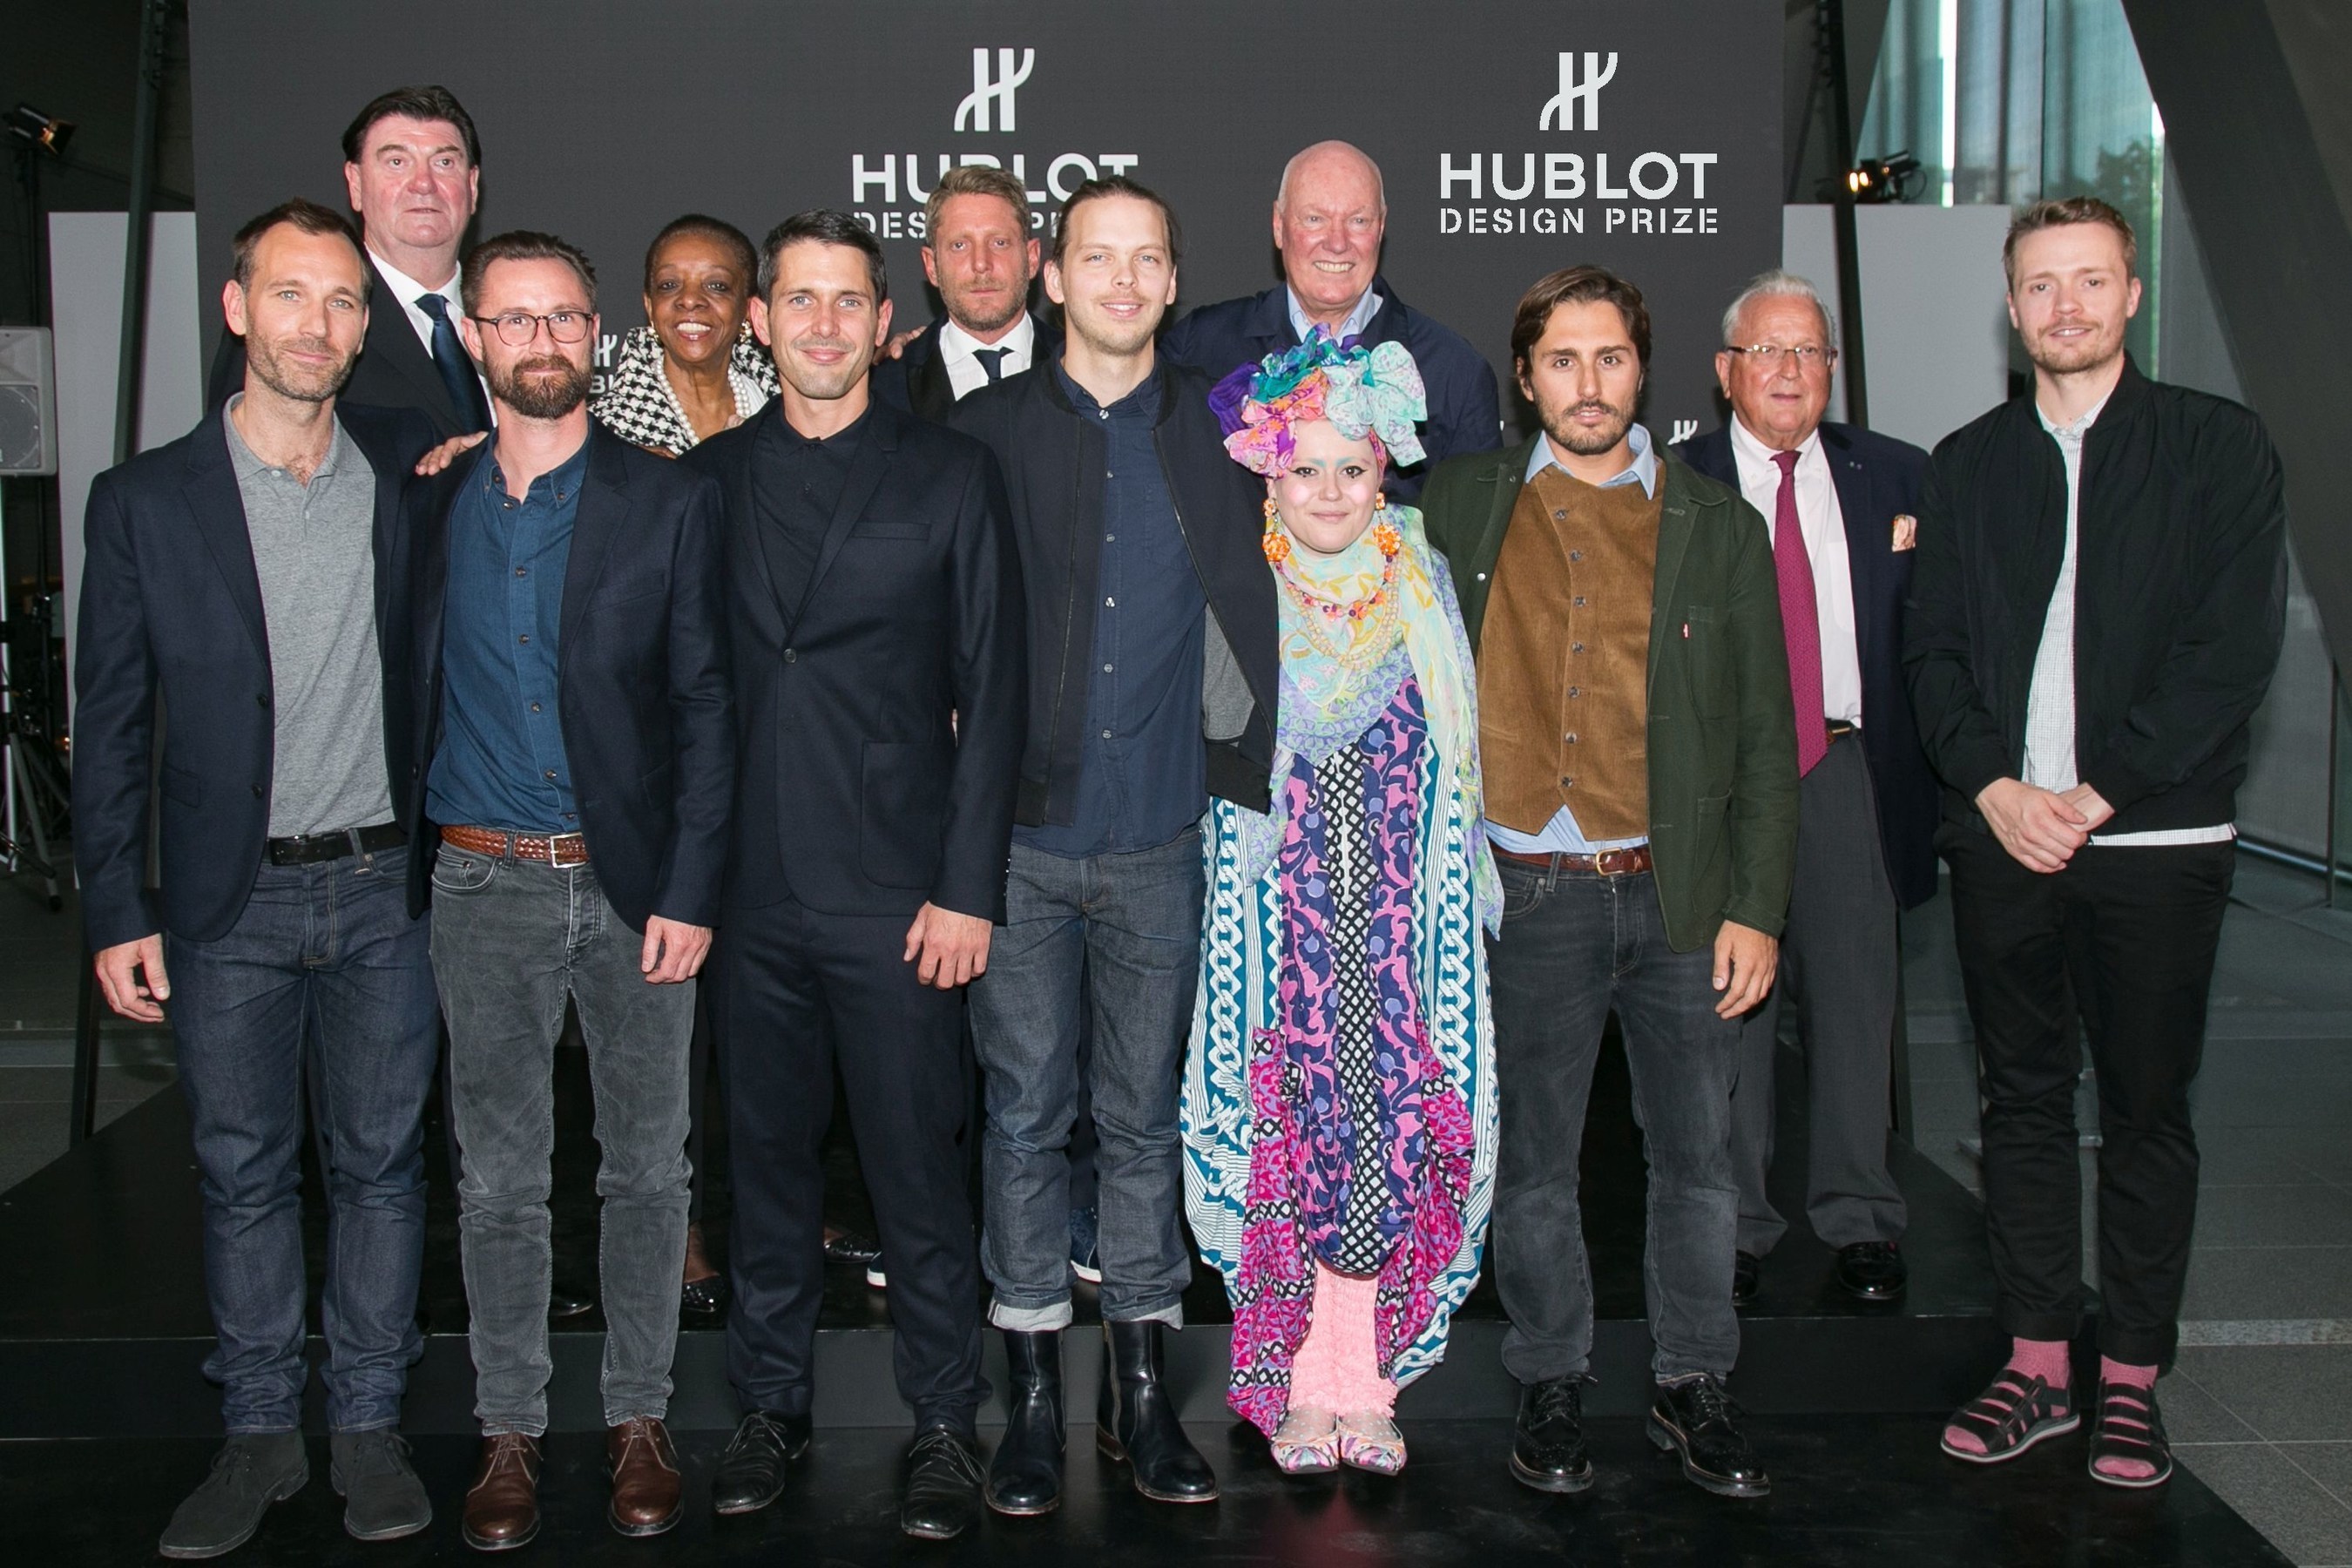 The Hublot Design Prize jury and finalists with Mr Jean-Claude Biver, Chairman Hublot2 (PRNewsFoto/HUBLOT) (PRNewsFoto/HUBLOT)